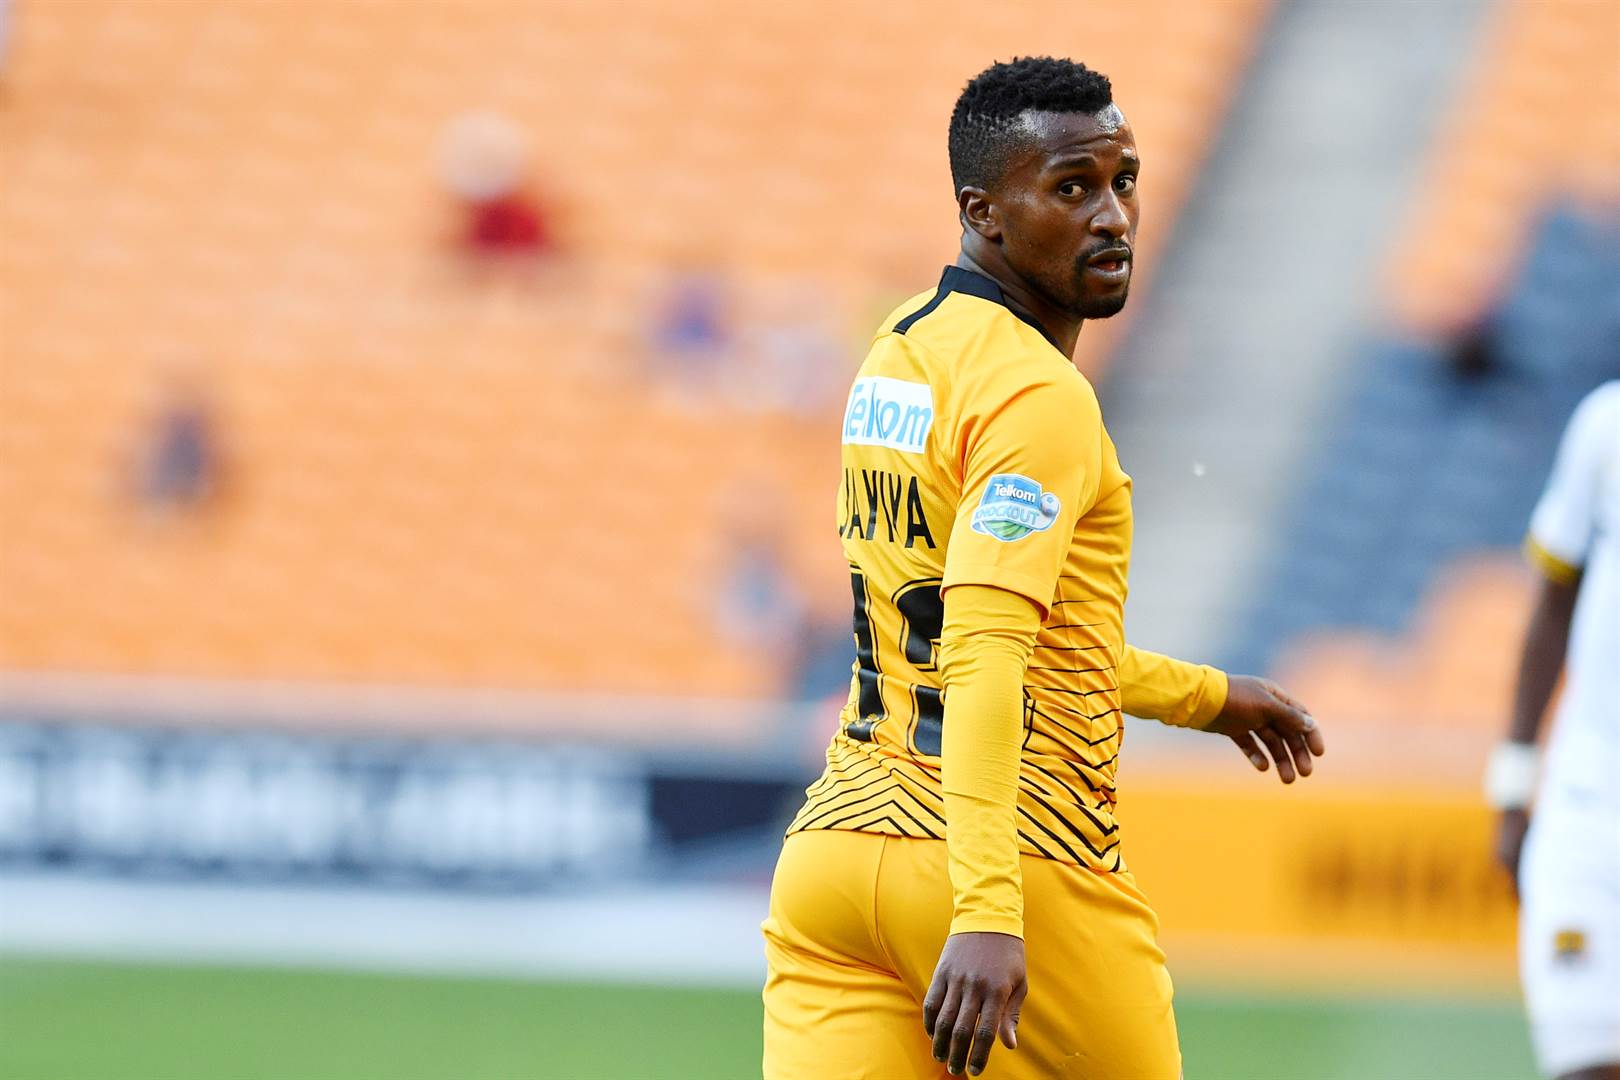 Bongolethu Jayiya has not played professional football since leaving Chiefs in 2019.